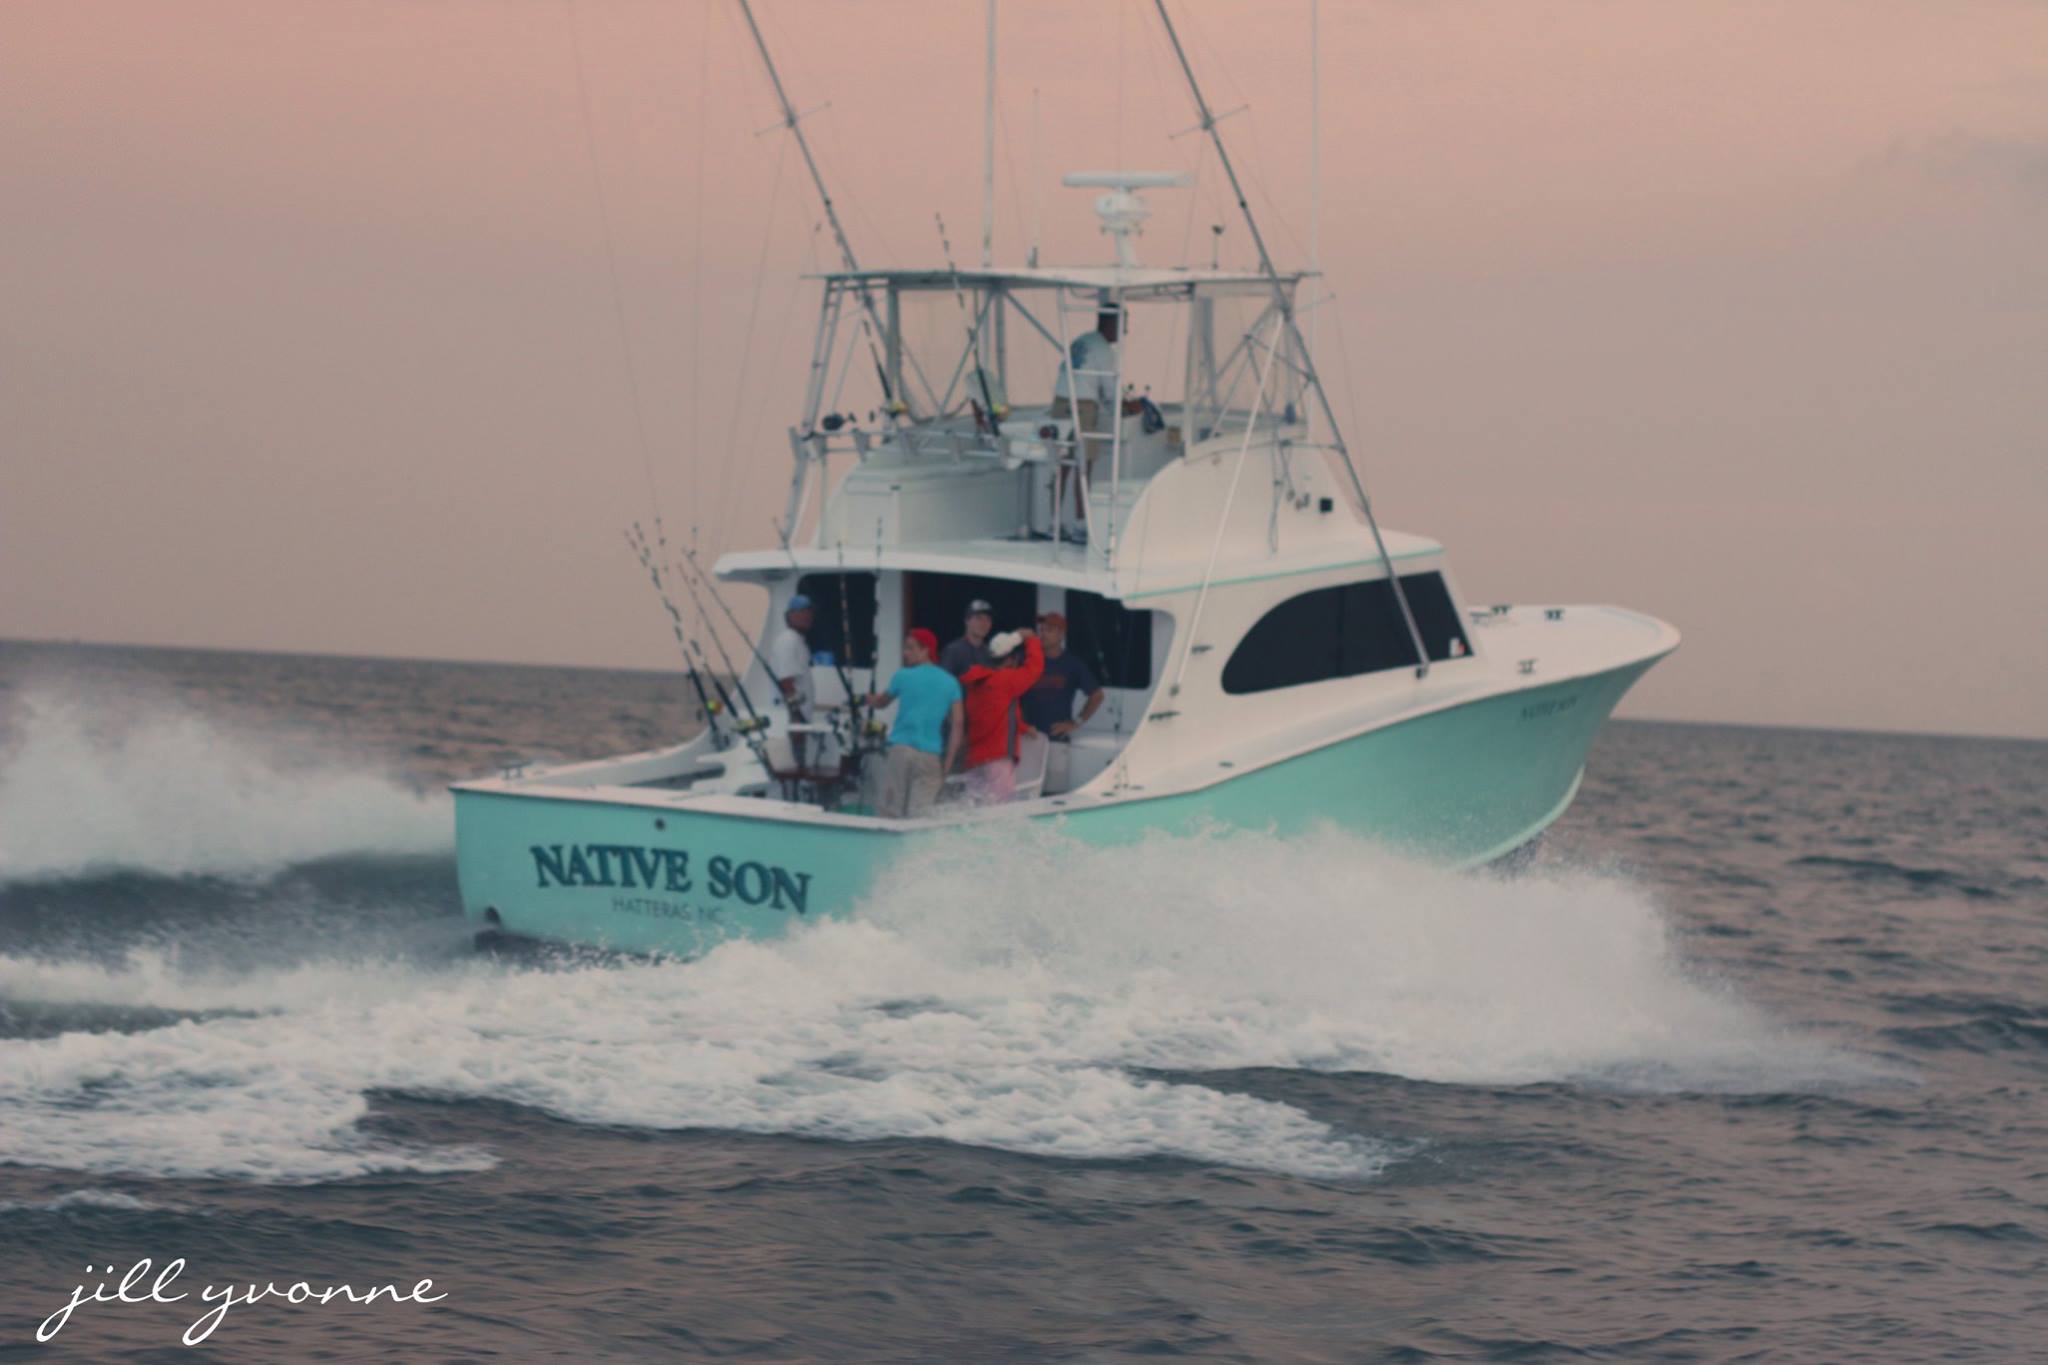 Native Son Sport Fishing – Hatteras and Outer Banks Fishing Charters